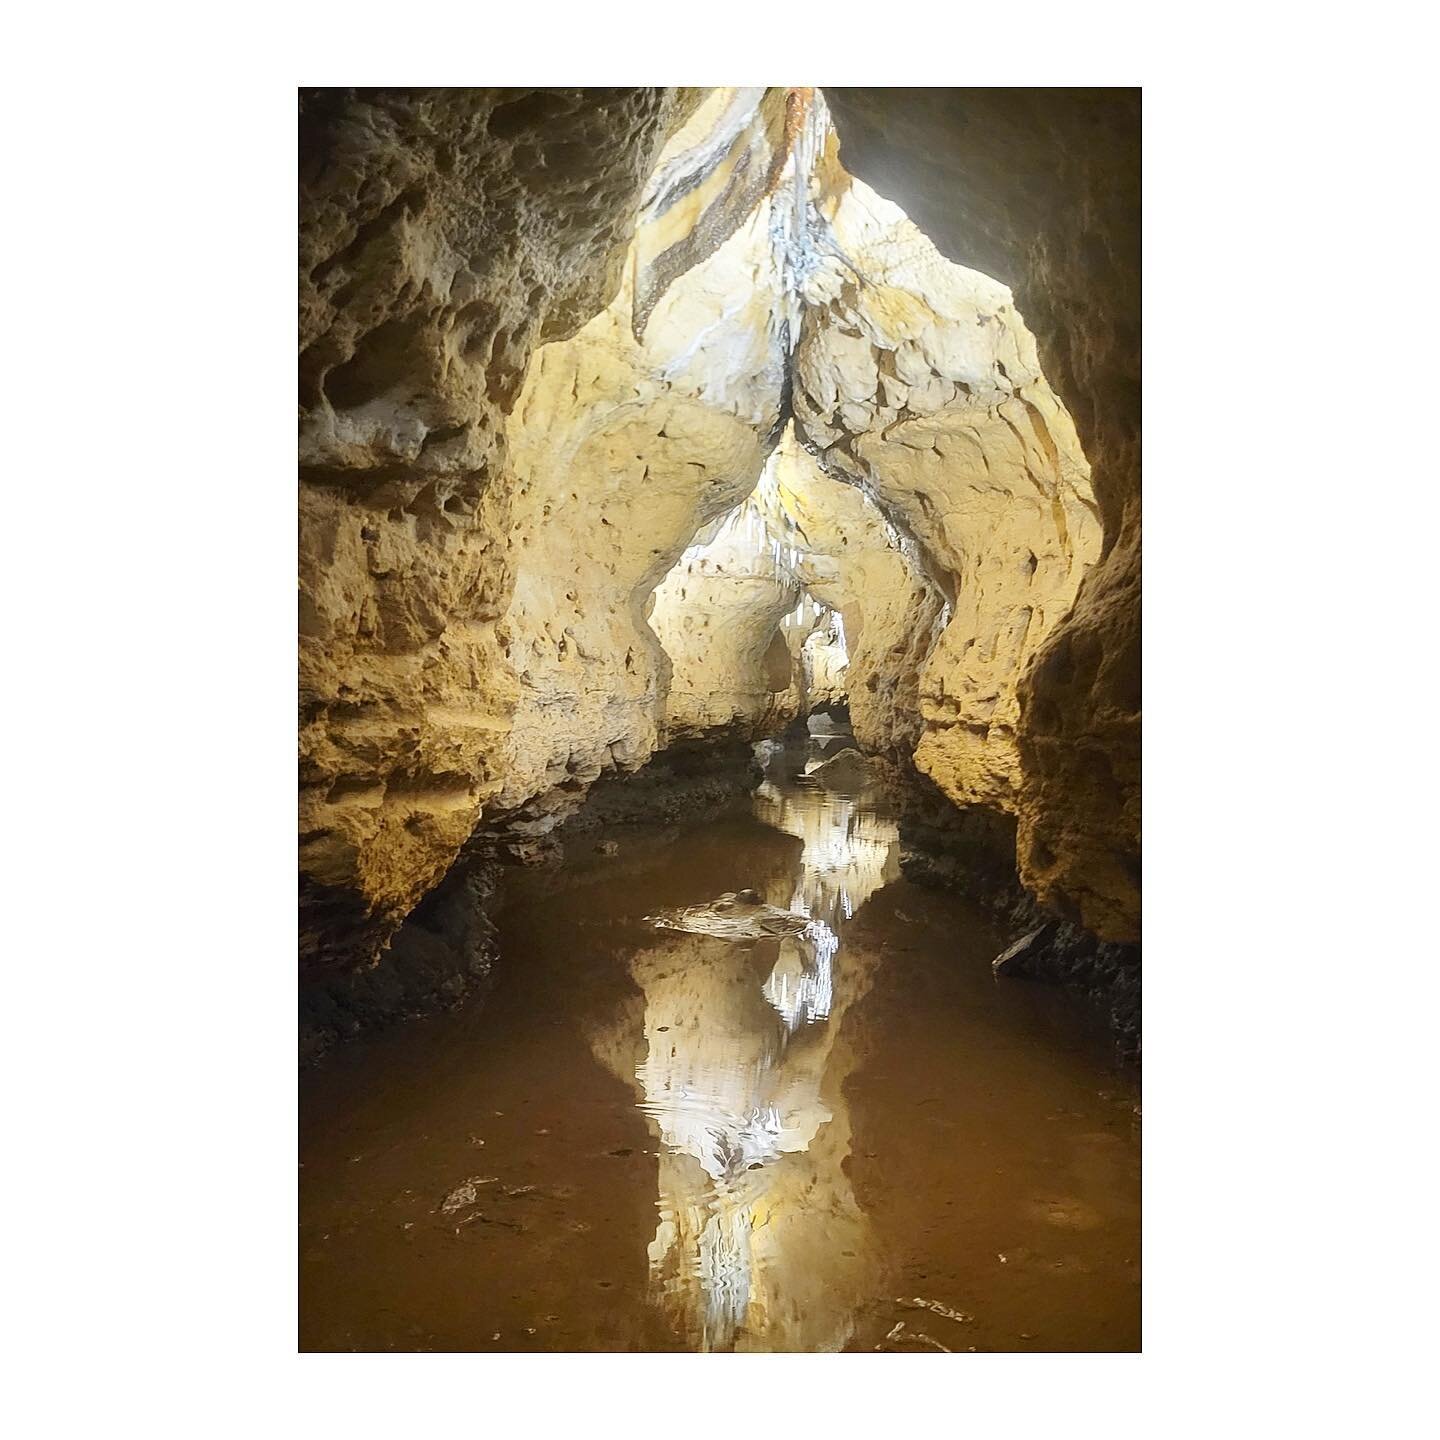 Cave of the mounds image. Coming back from being underground for awhile. I stopped posting on the Awaken Art Therapy account back in January 2021. At that time I needed to be with myself and found that social media was pulling my energy in ways I did